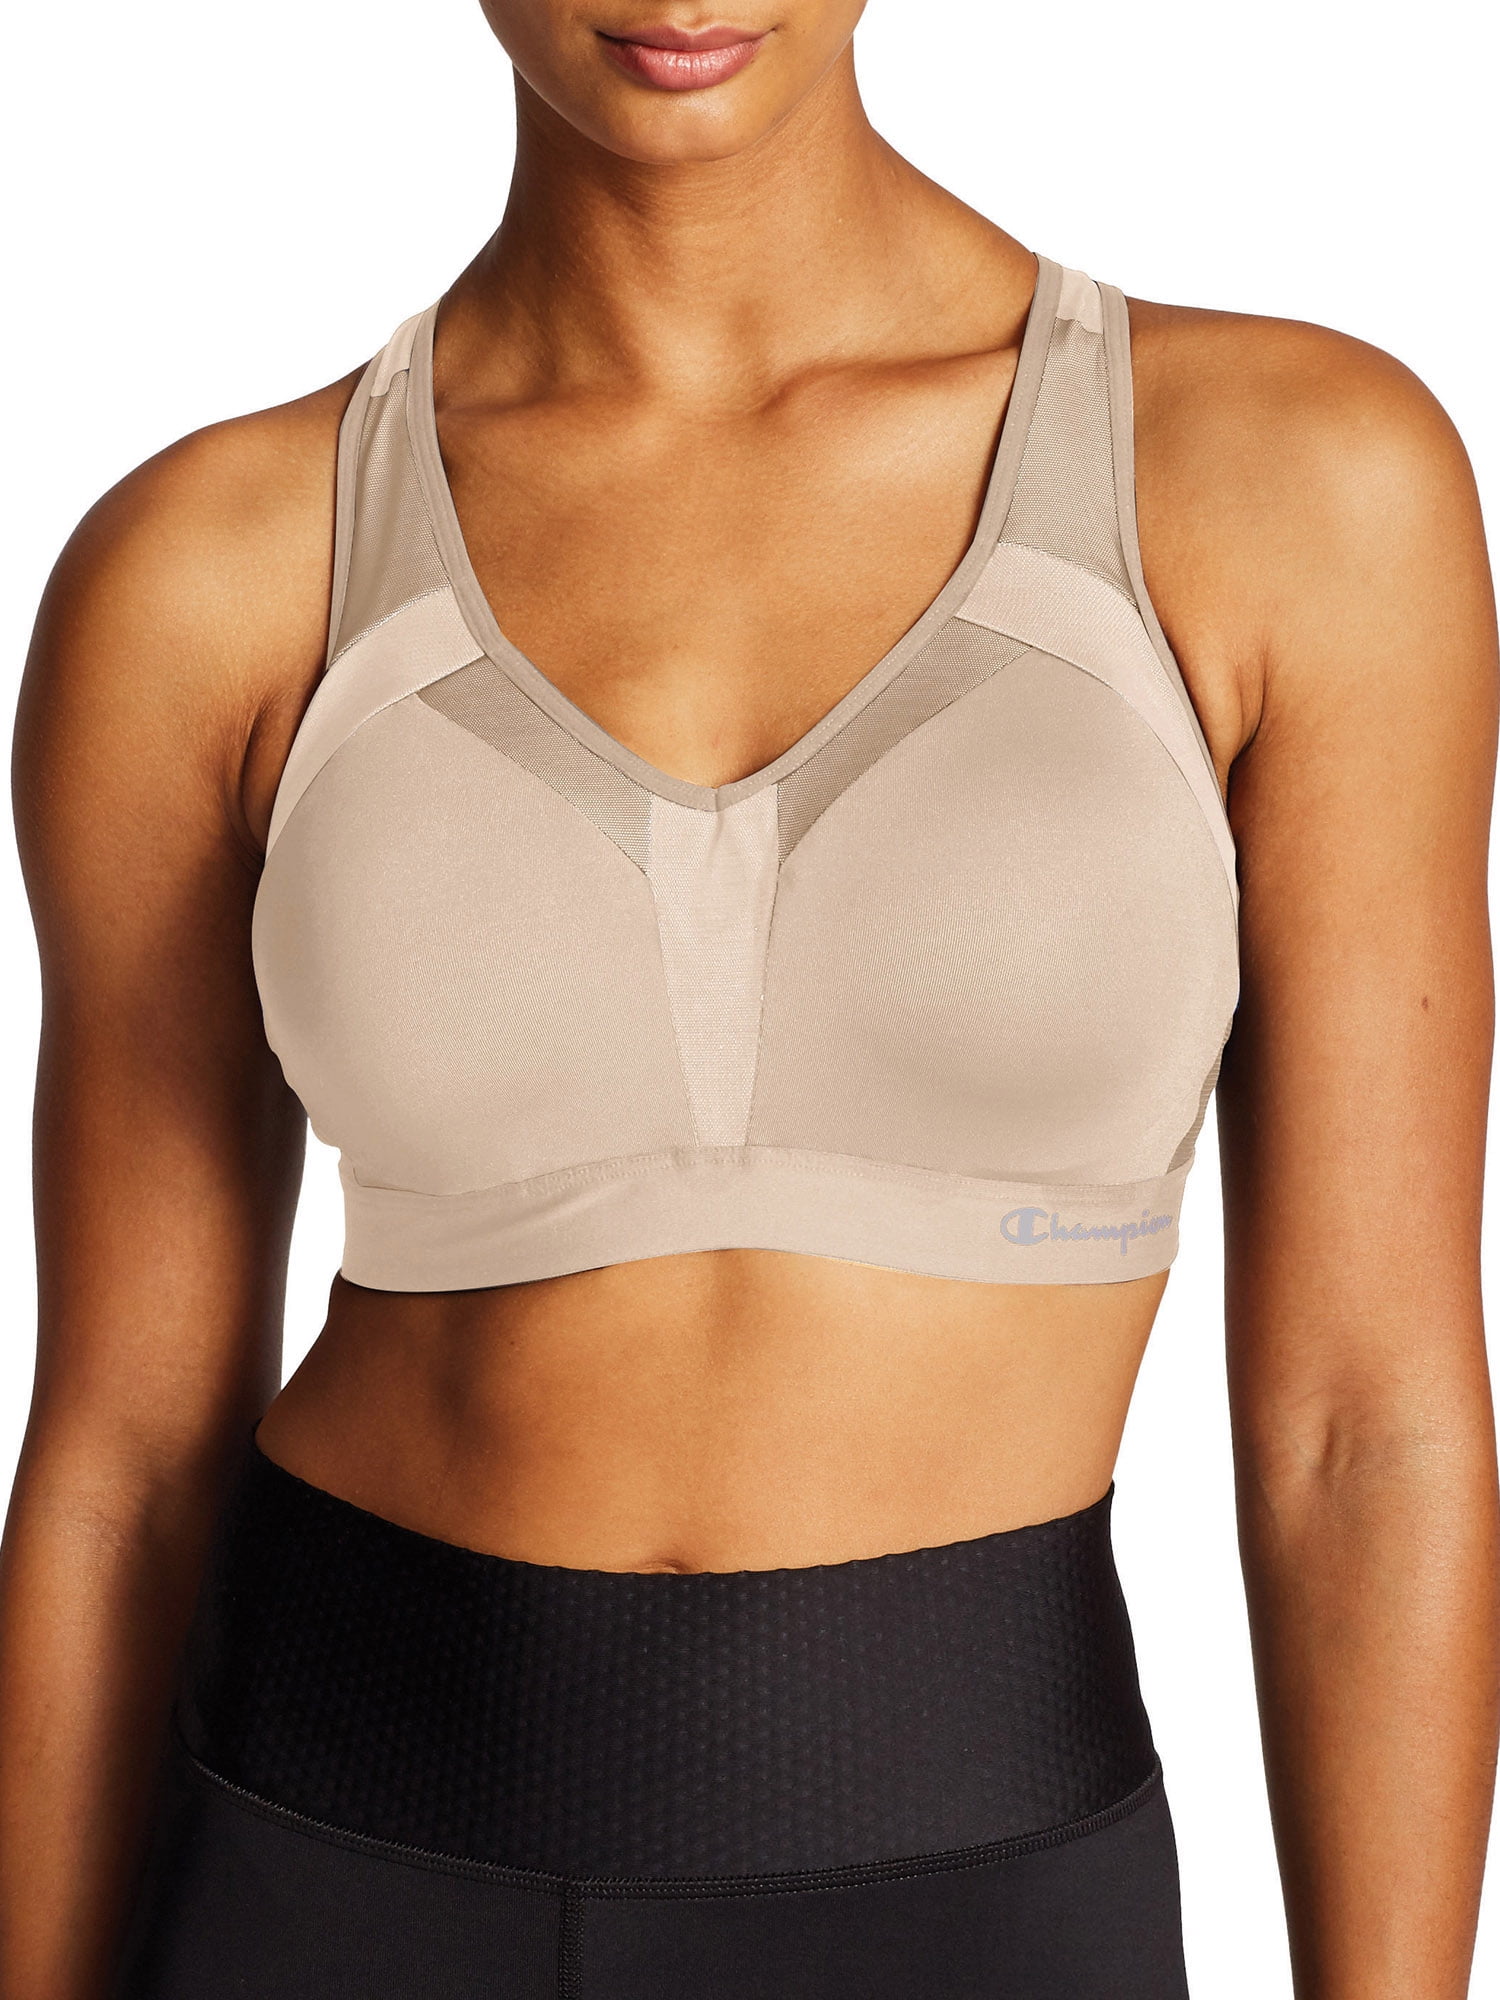 Details about   Champion Womens Motion Control Cross-Back Sports Bra 